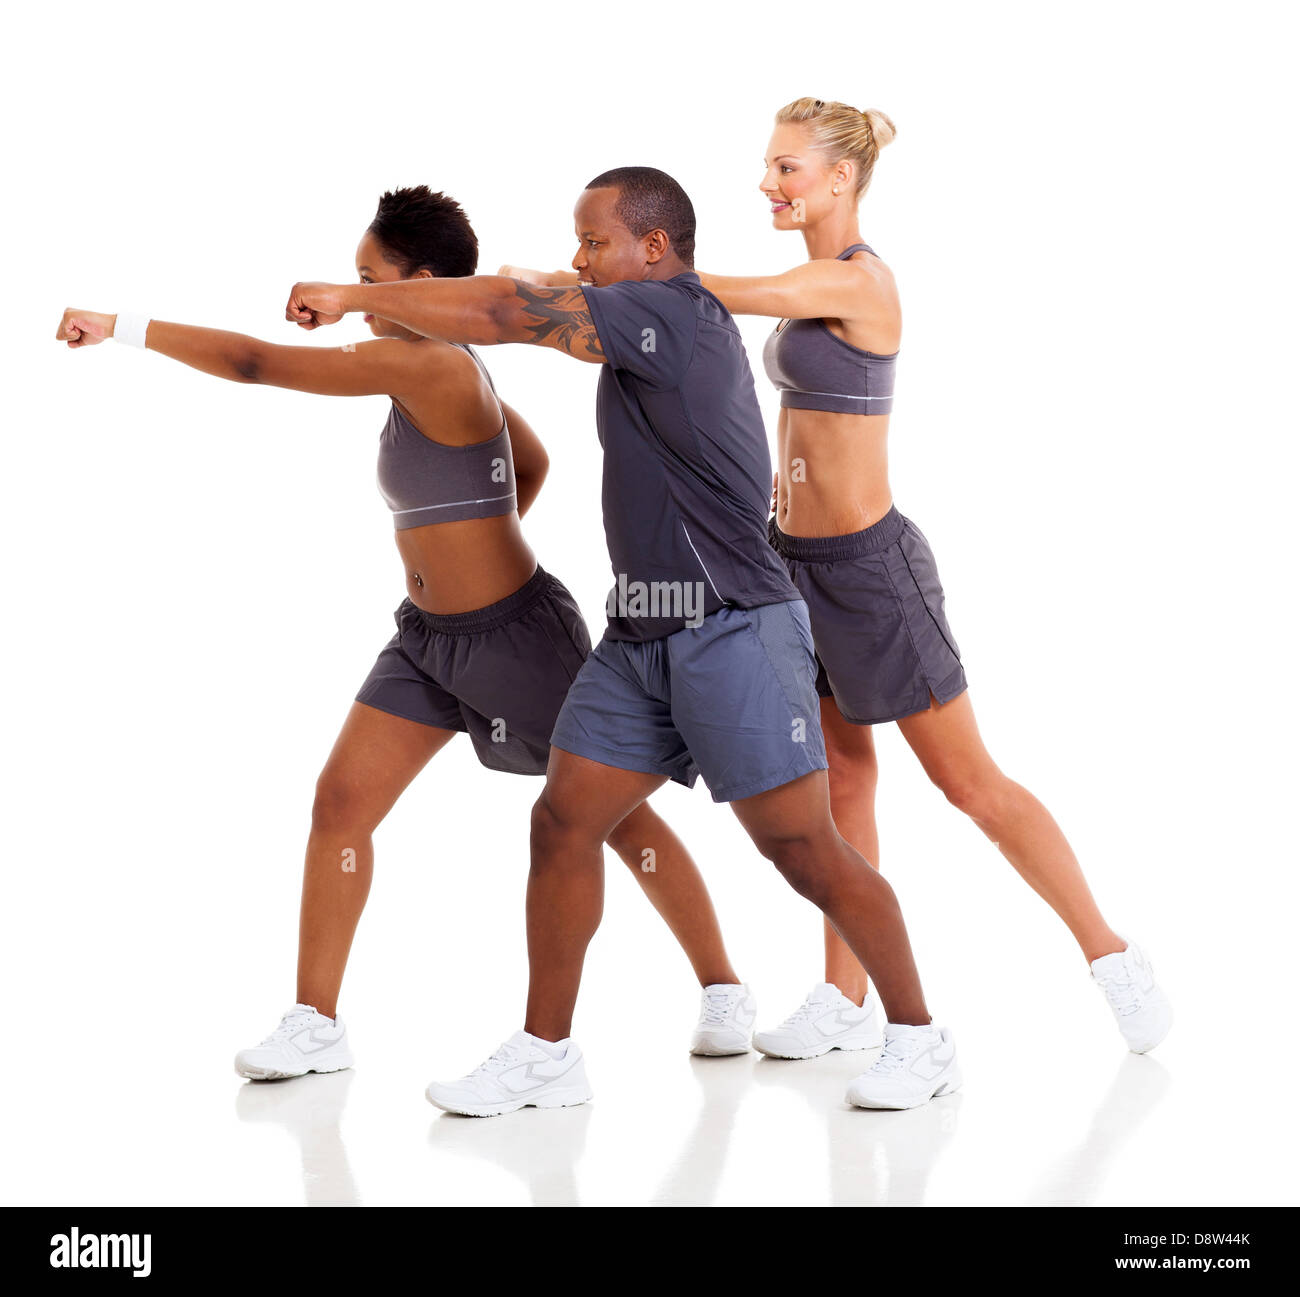 group of fit people exercising karate on white background Stock Photo